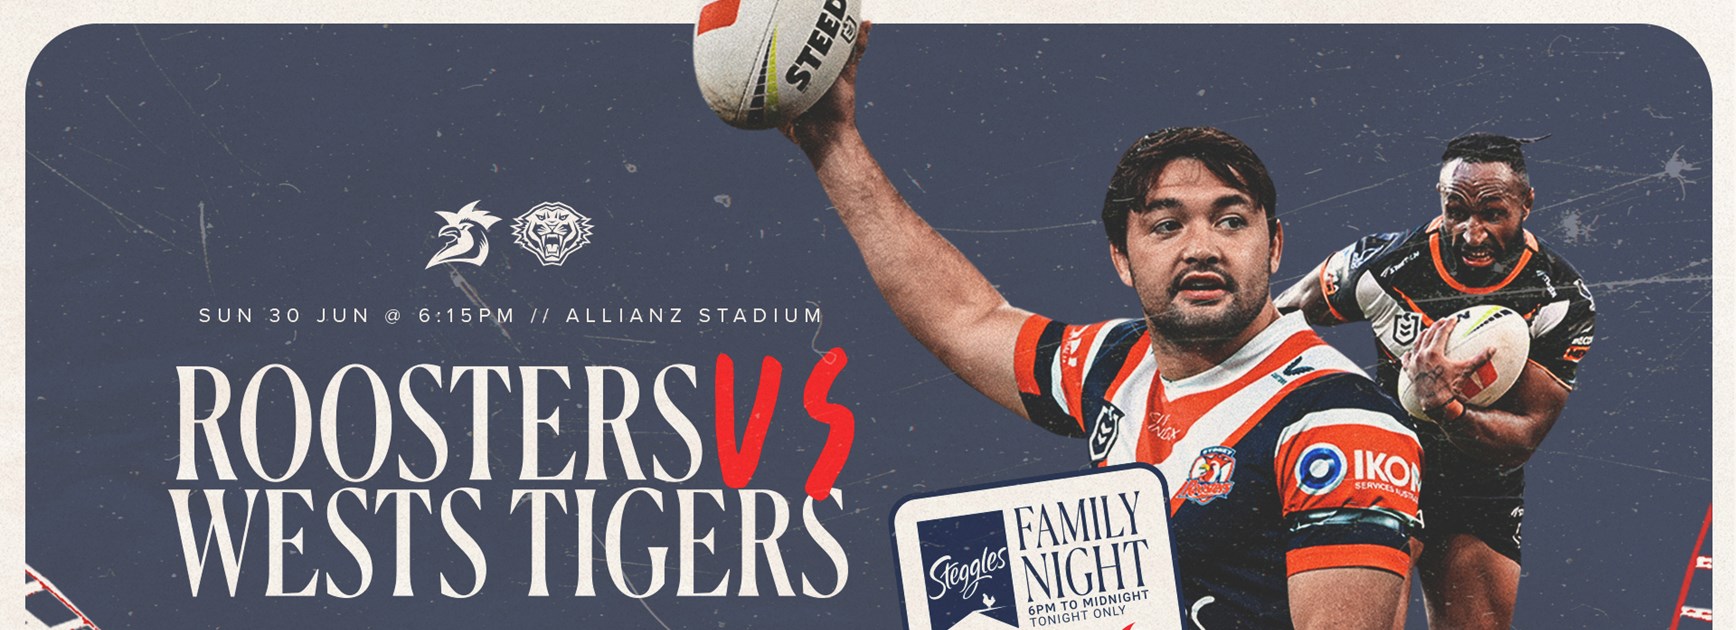 Get 20% Off All Round 17 Family Passes with Steggles Family Night!